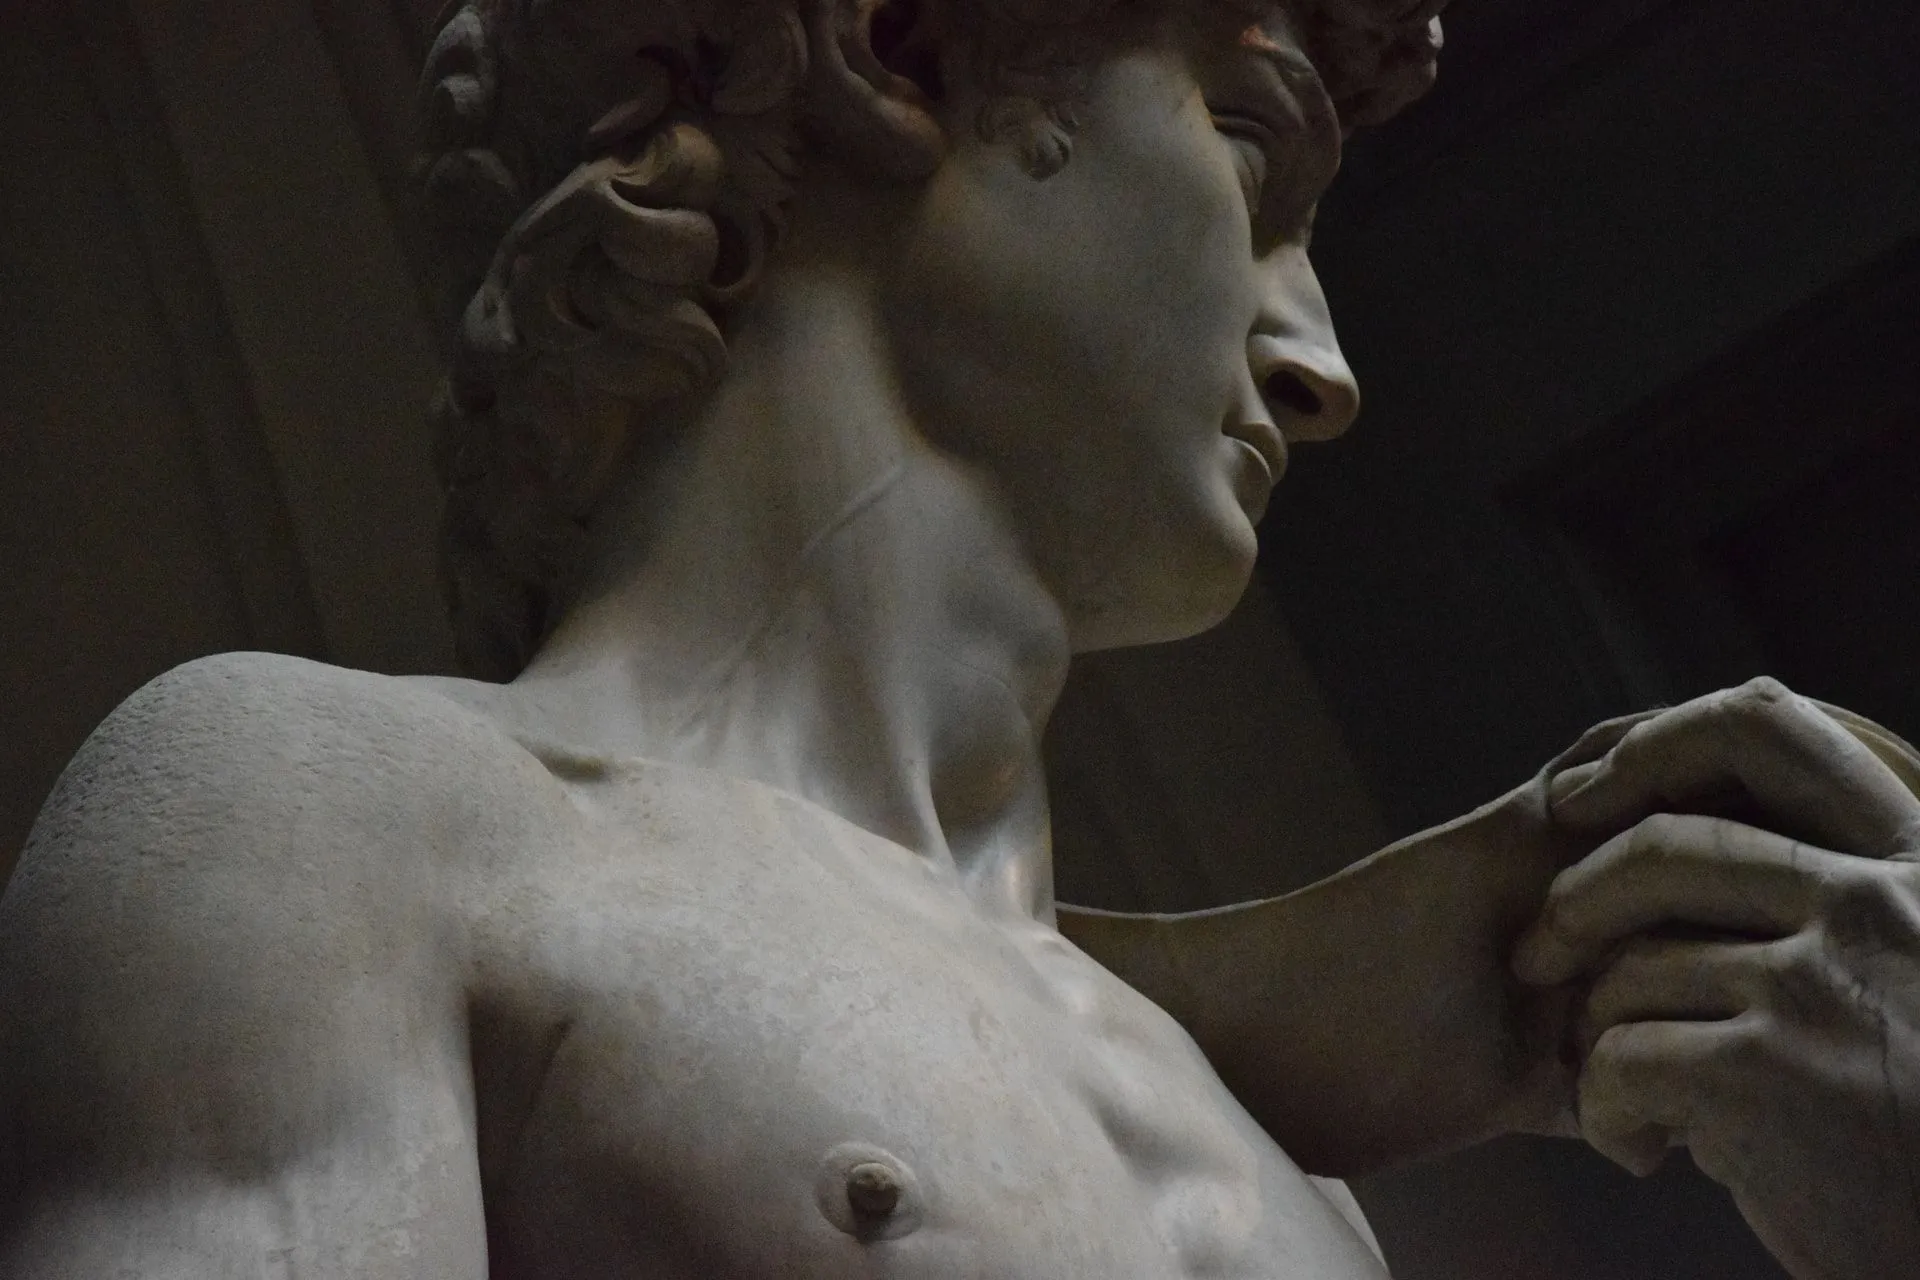 There are various replicas of David all around the world but none has come close to the one by Michelangelo.